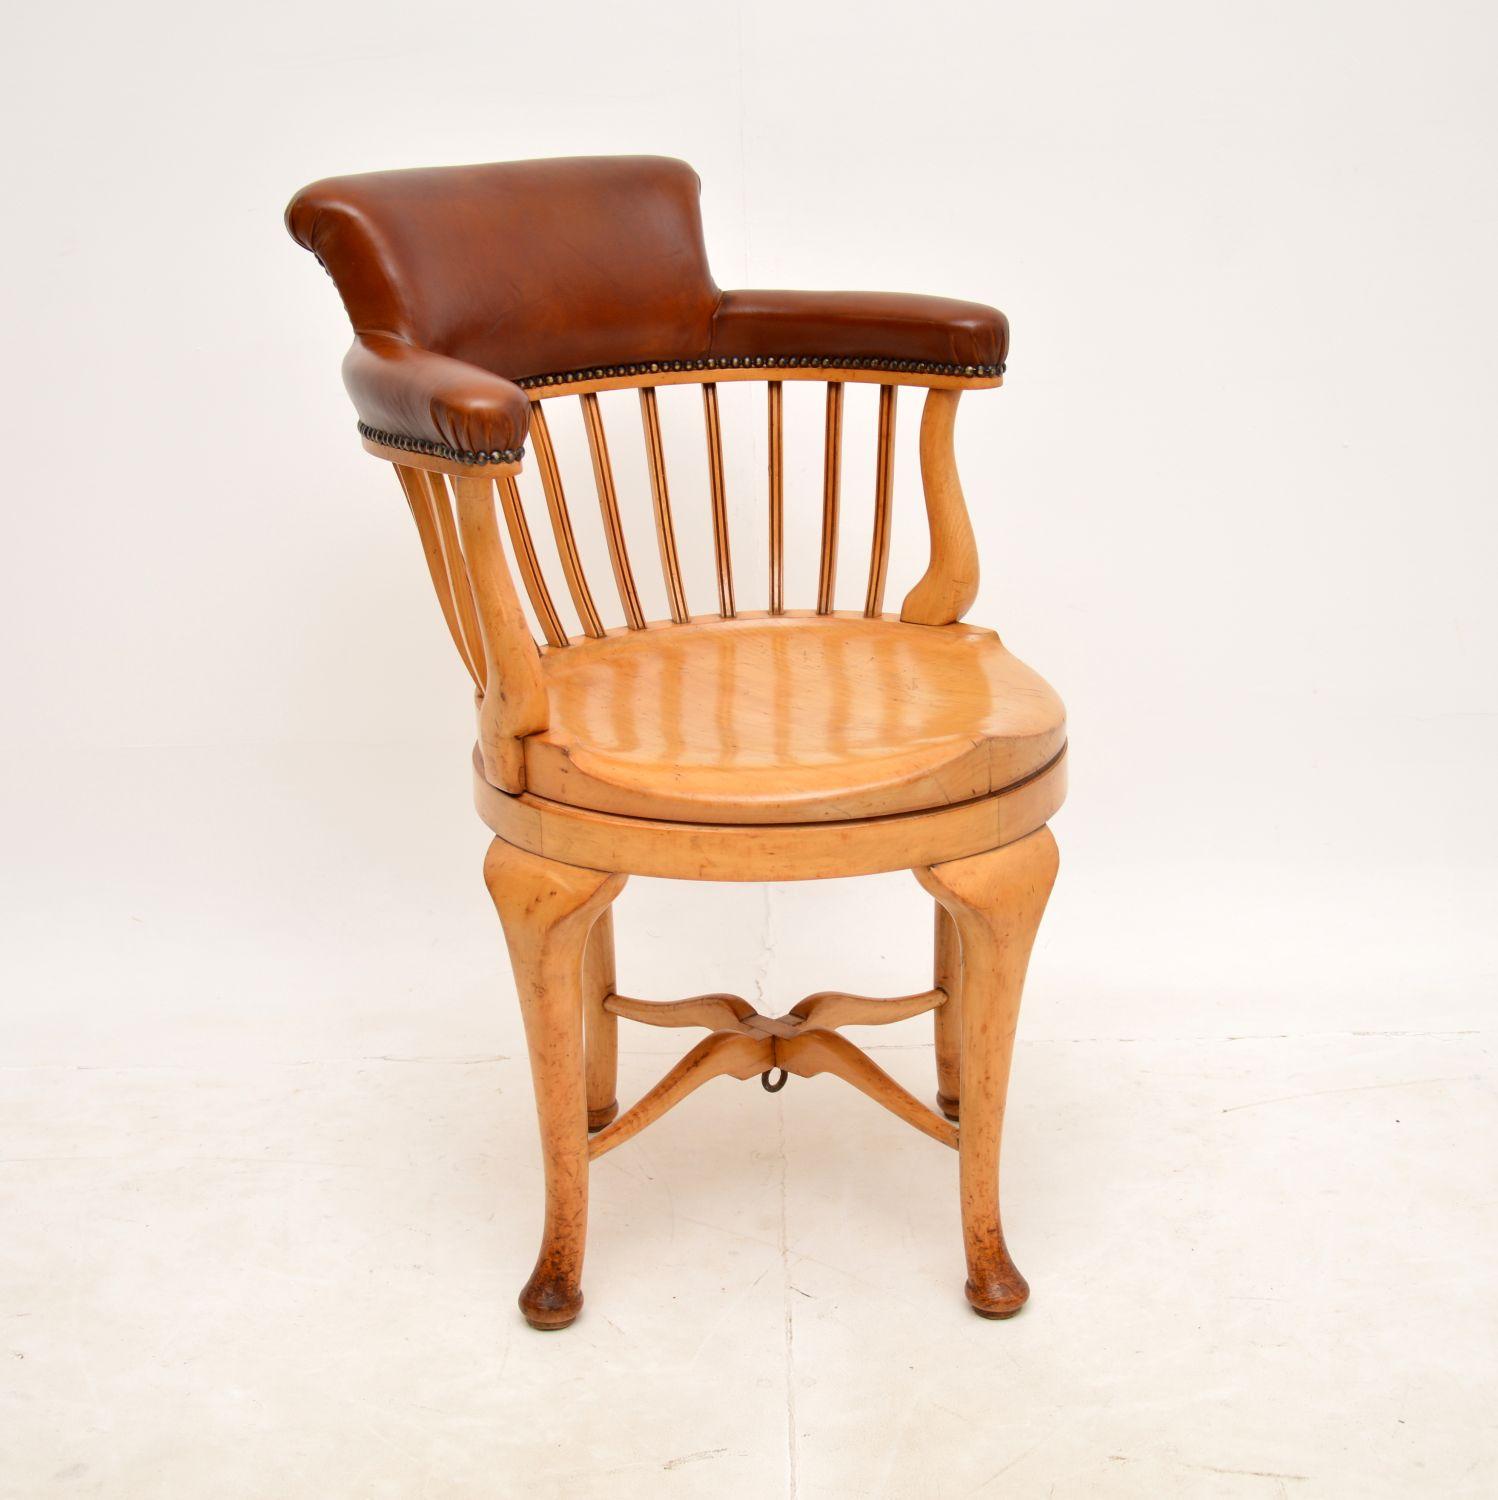 A superb antique Victorian swivel desk chair. This was made in England, it dates from around the 1880-1900 period.

The frame is beautifully made from solid ash, with an upholstered leather back and arms. It is very sturdy and comfortable, the seat